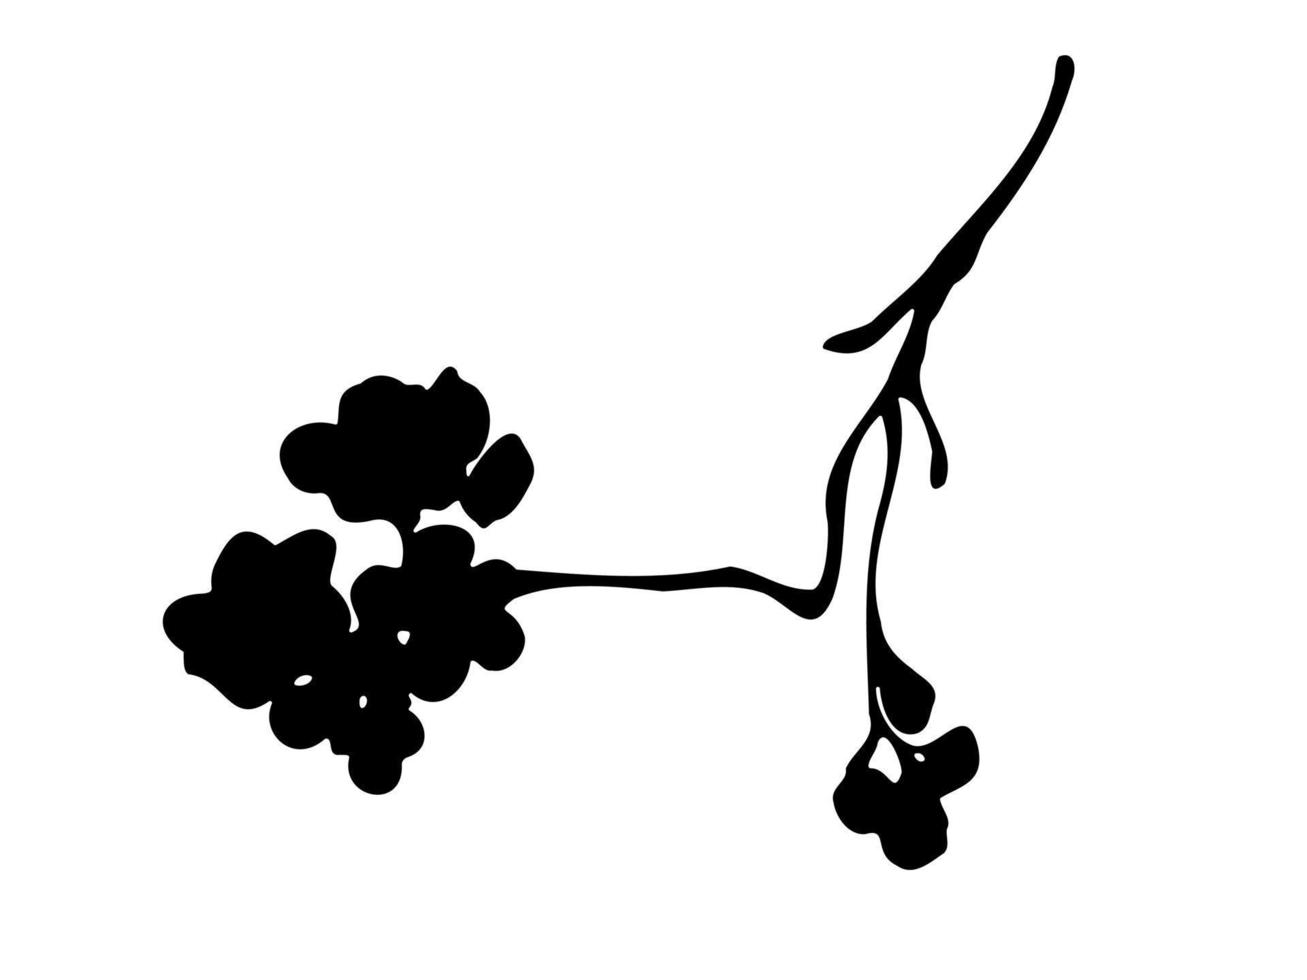 Hand drawn cherry blossom branch silhouette on white background. vector